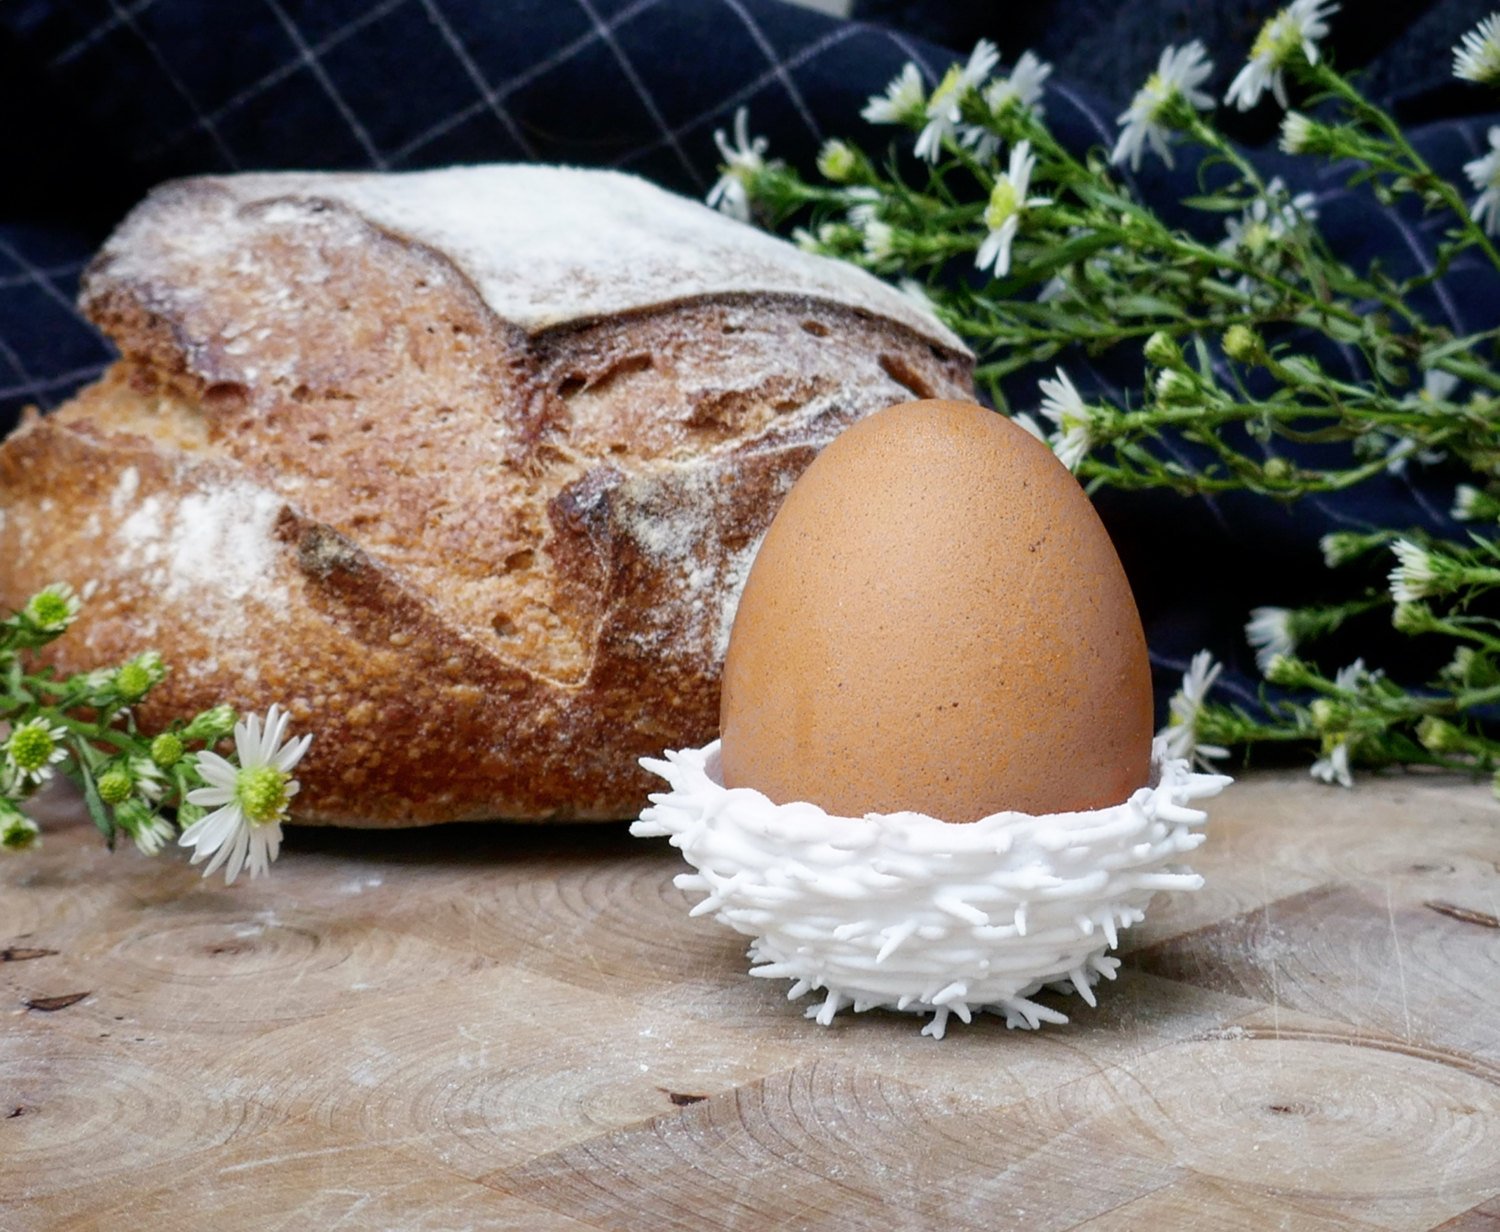 3D printed white egg nest with brown egg inside on a wooden table with flowers and loaf of bred